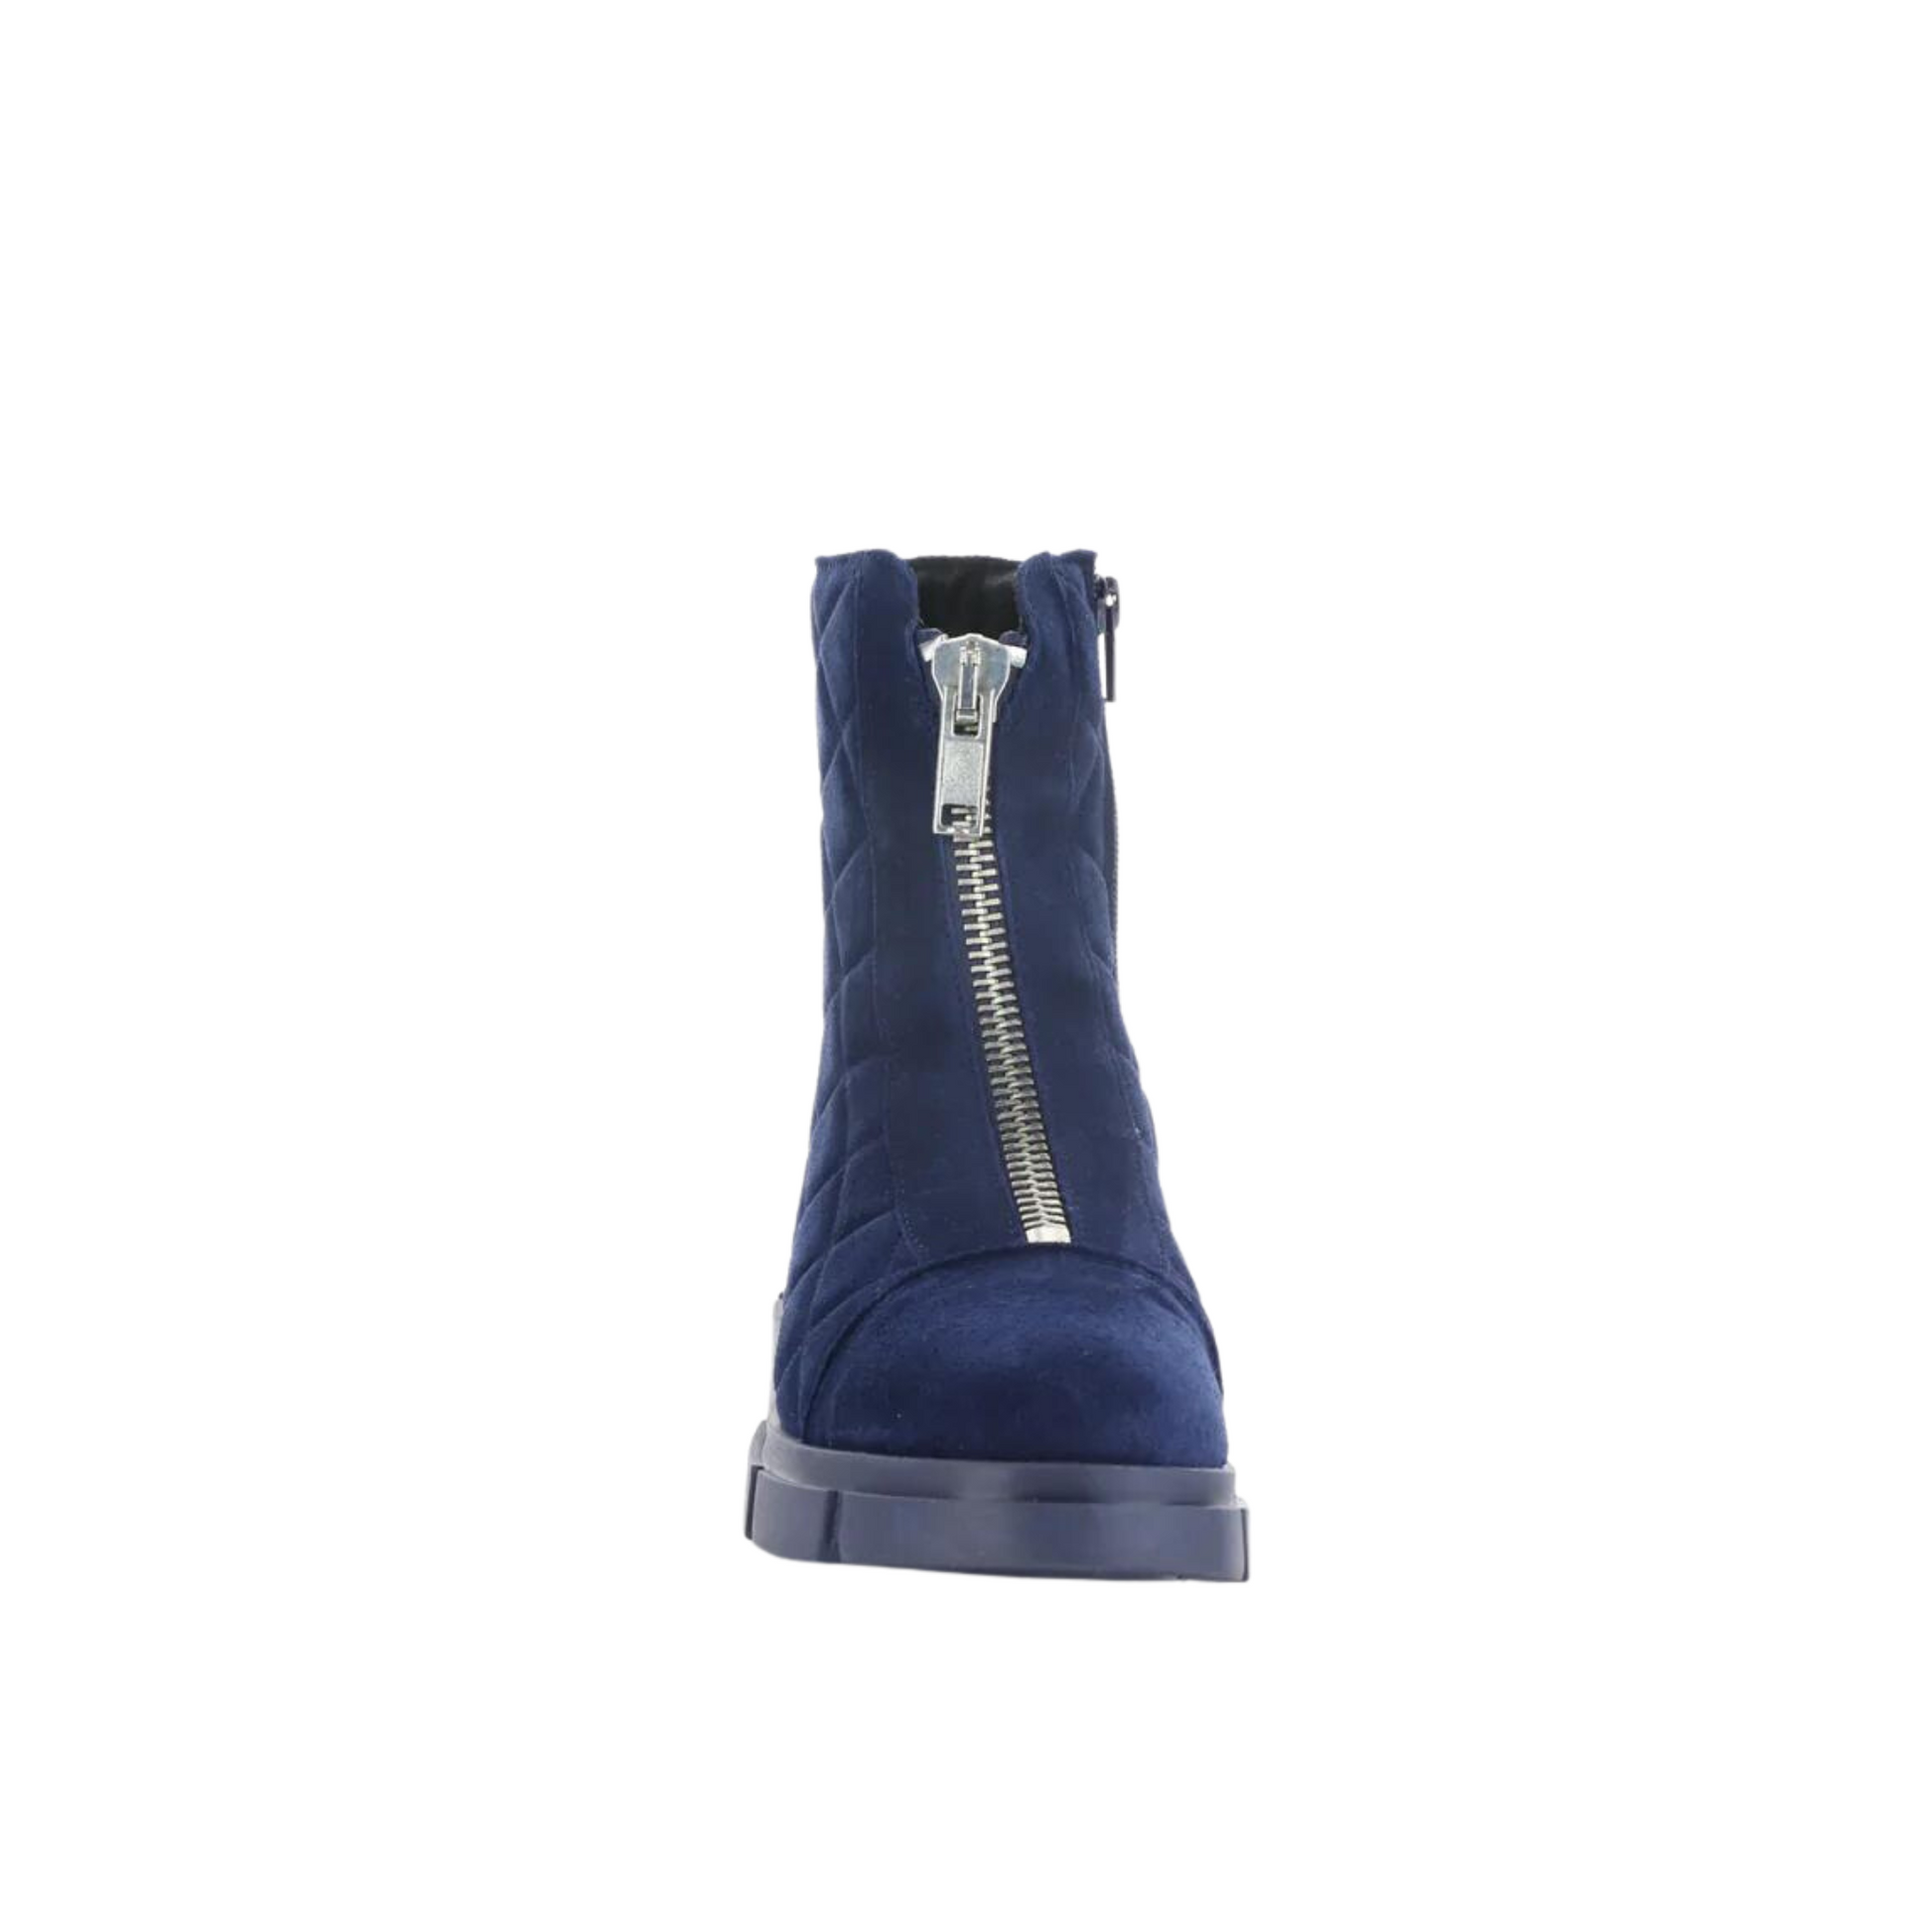 Front profile of the Bos & Co. Lane Boot in the colour Navy.